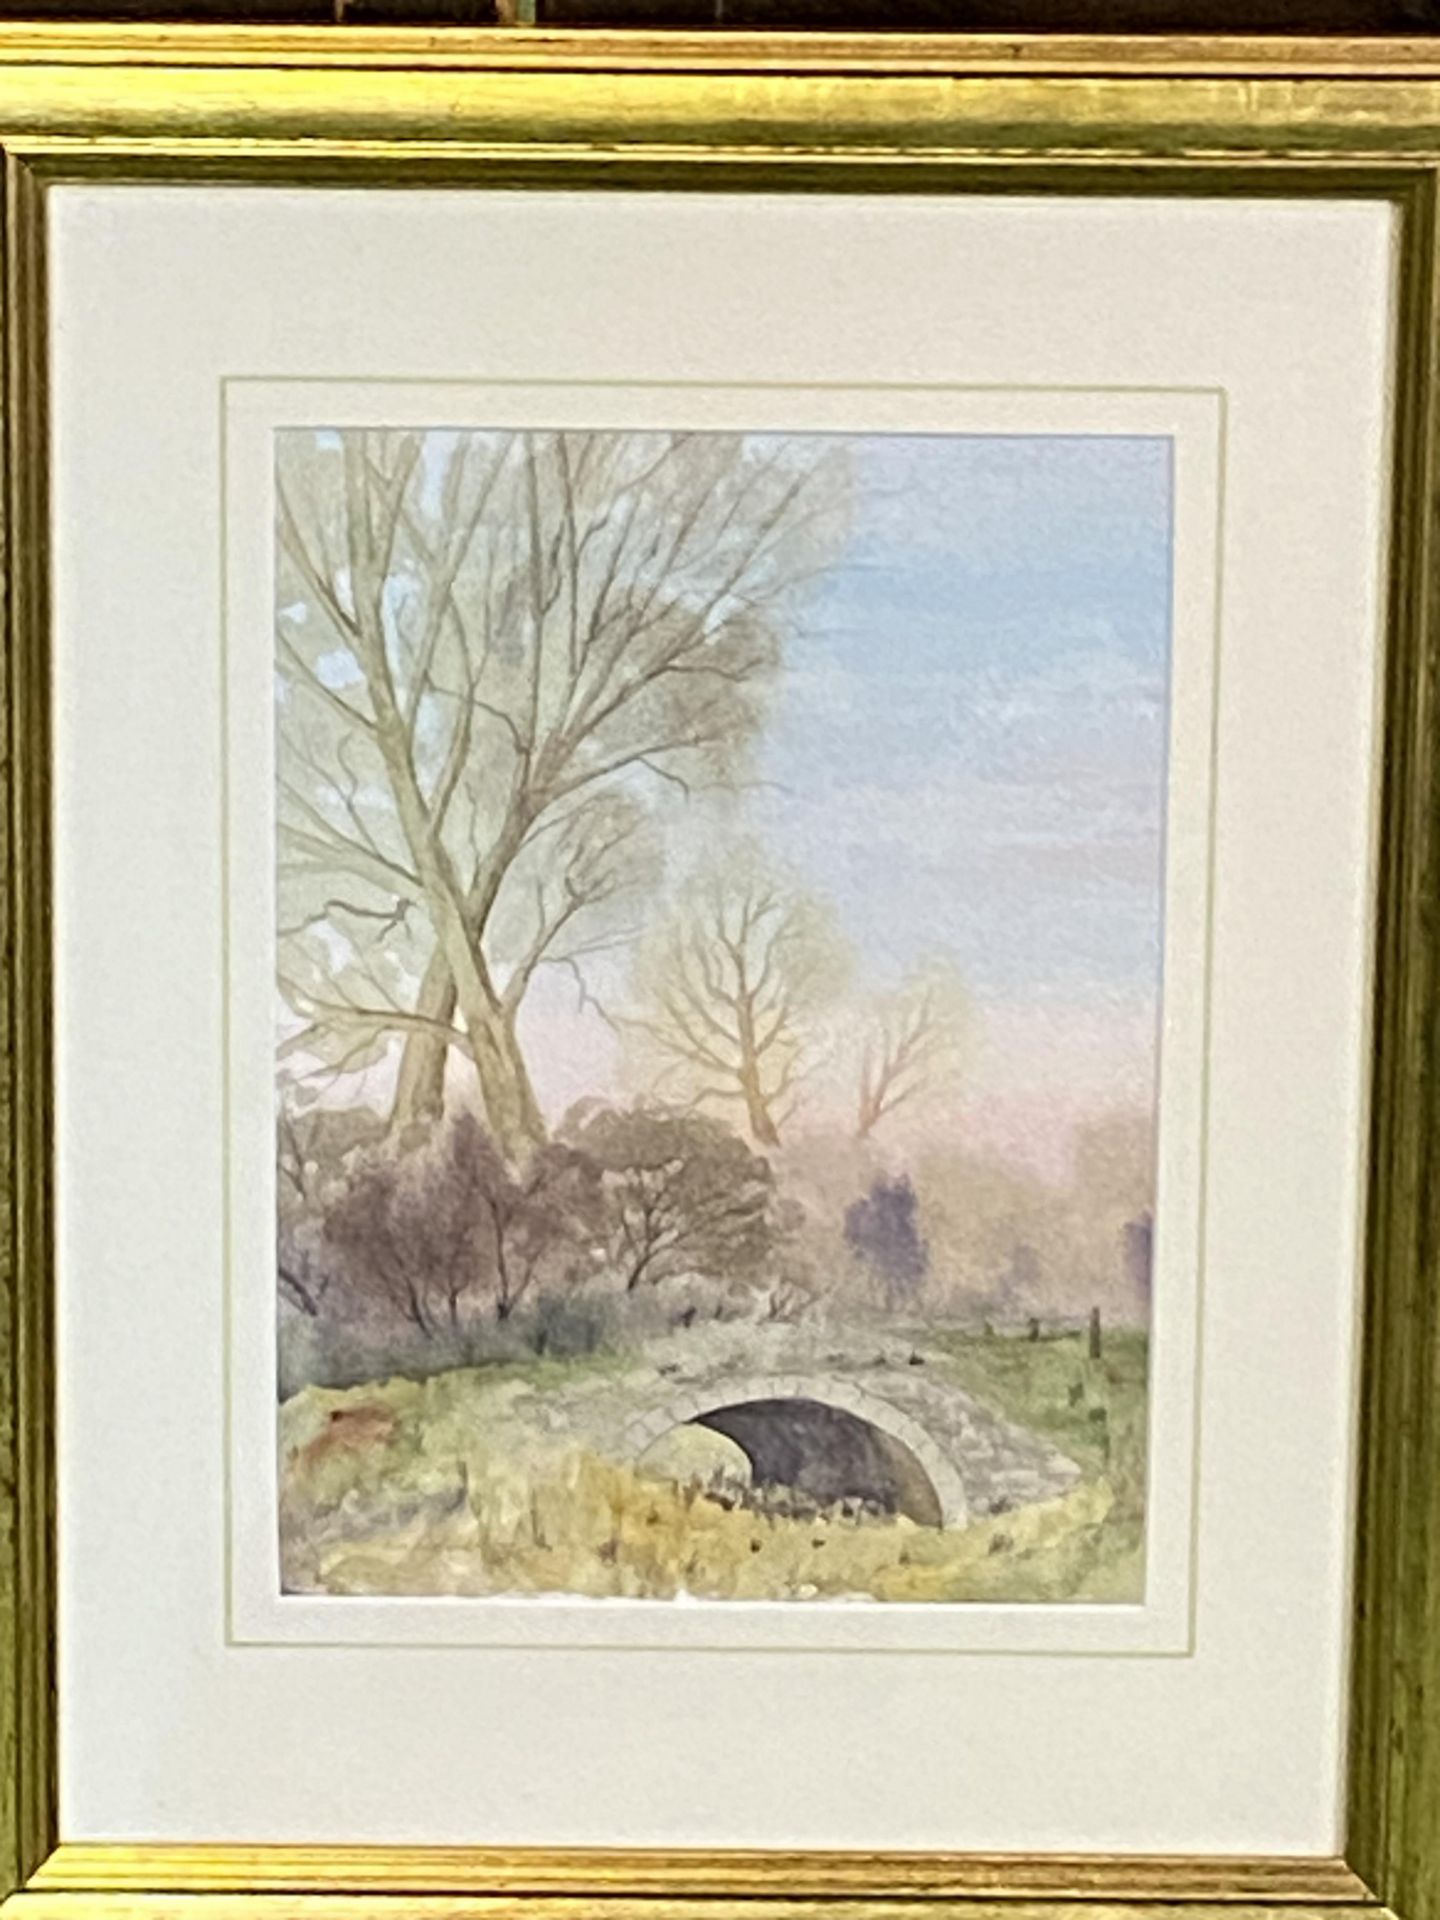 Framed and glazed watercolour by Ron Cosford - Bild 2 aus 3